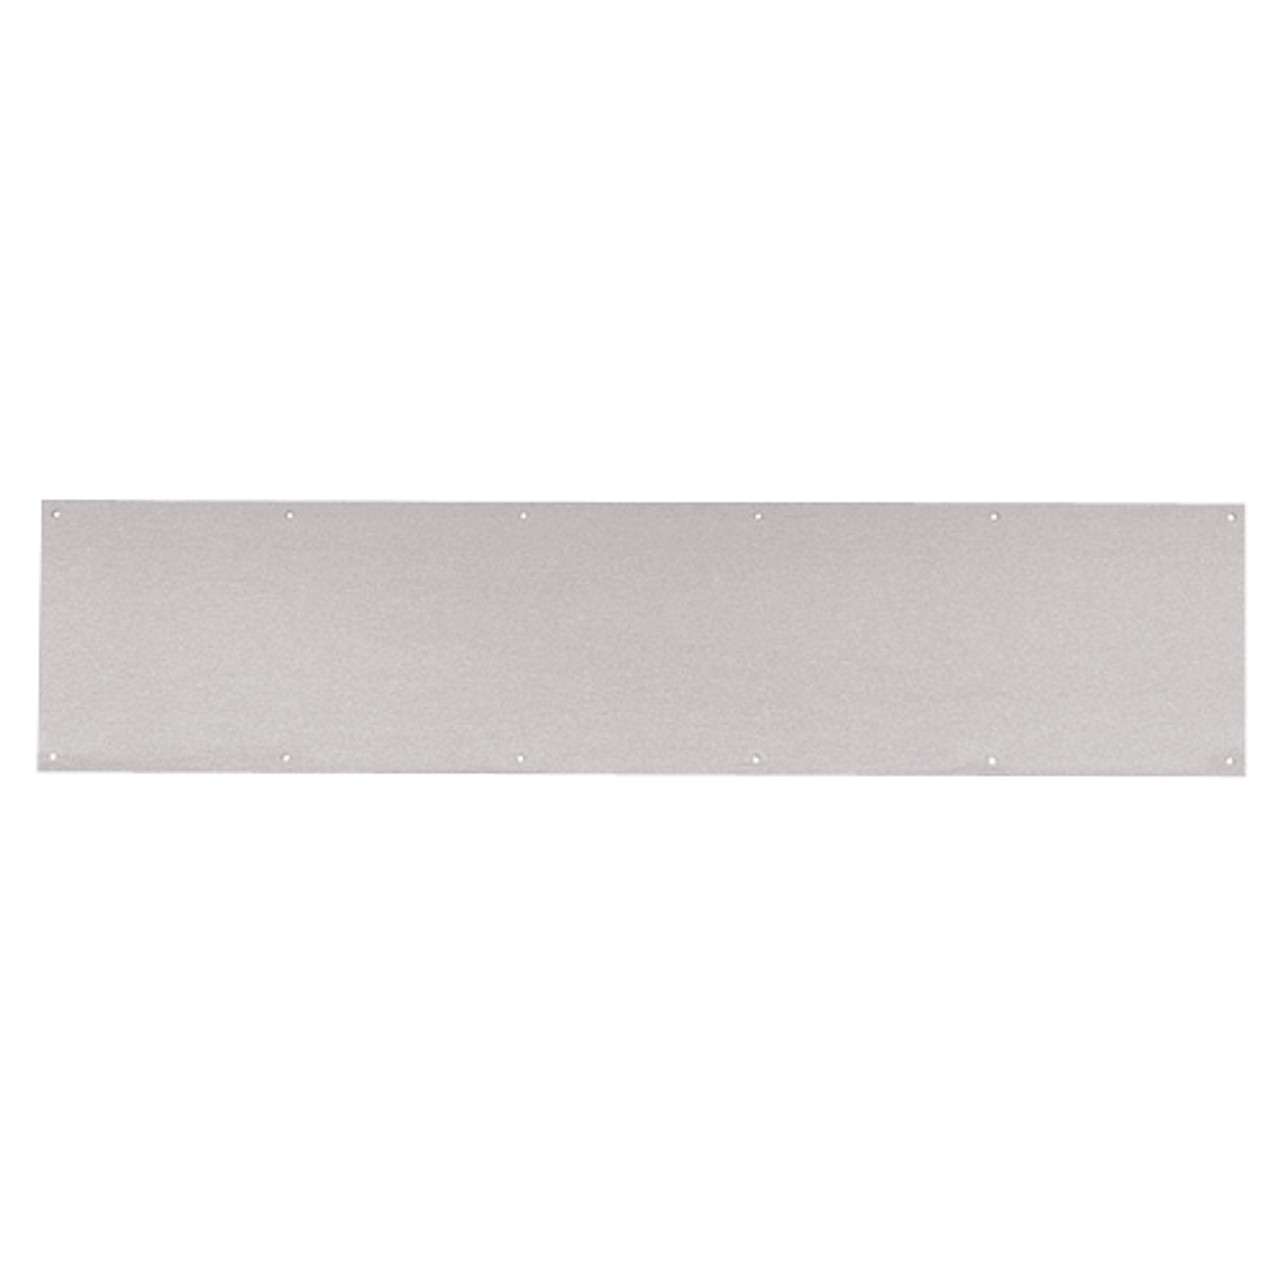 8400-US32D-36x32-B-CS Ives 8400 Series Protection Plate in Satin Stainless Steel